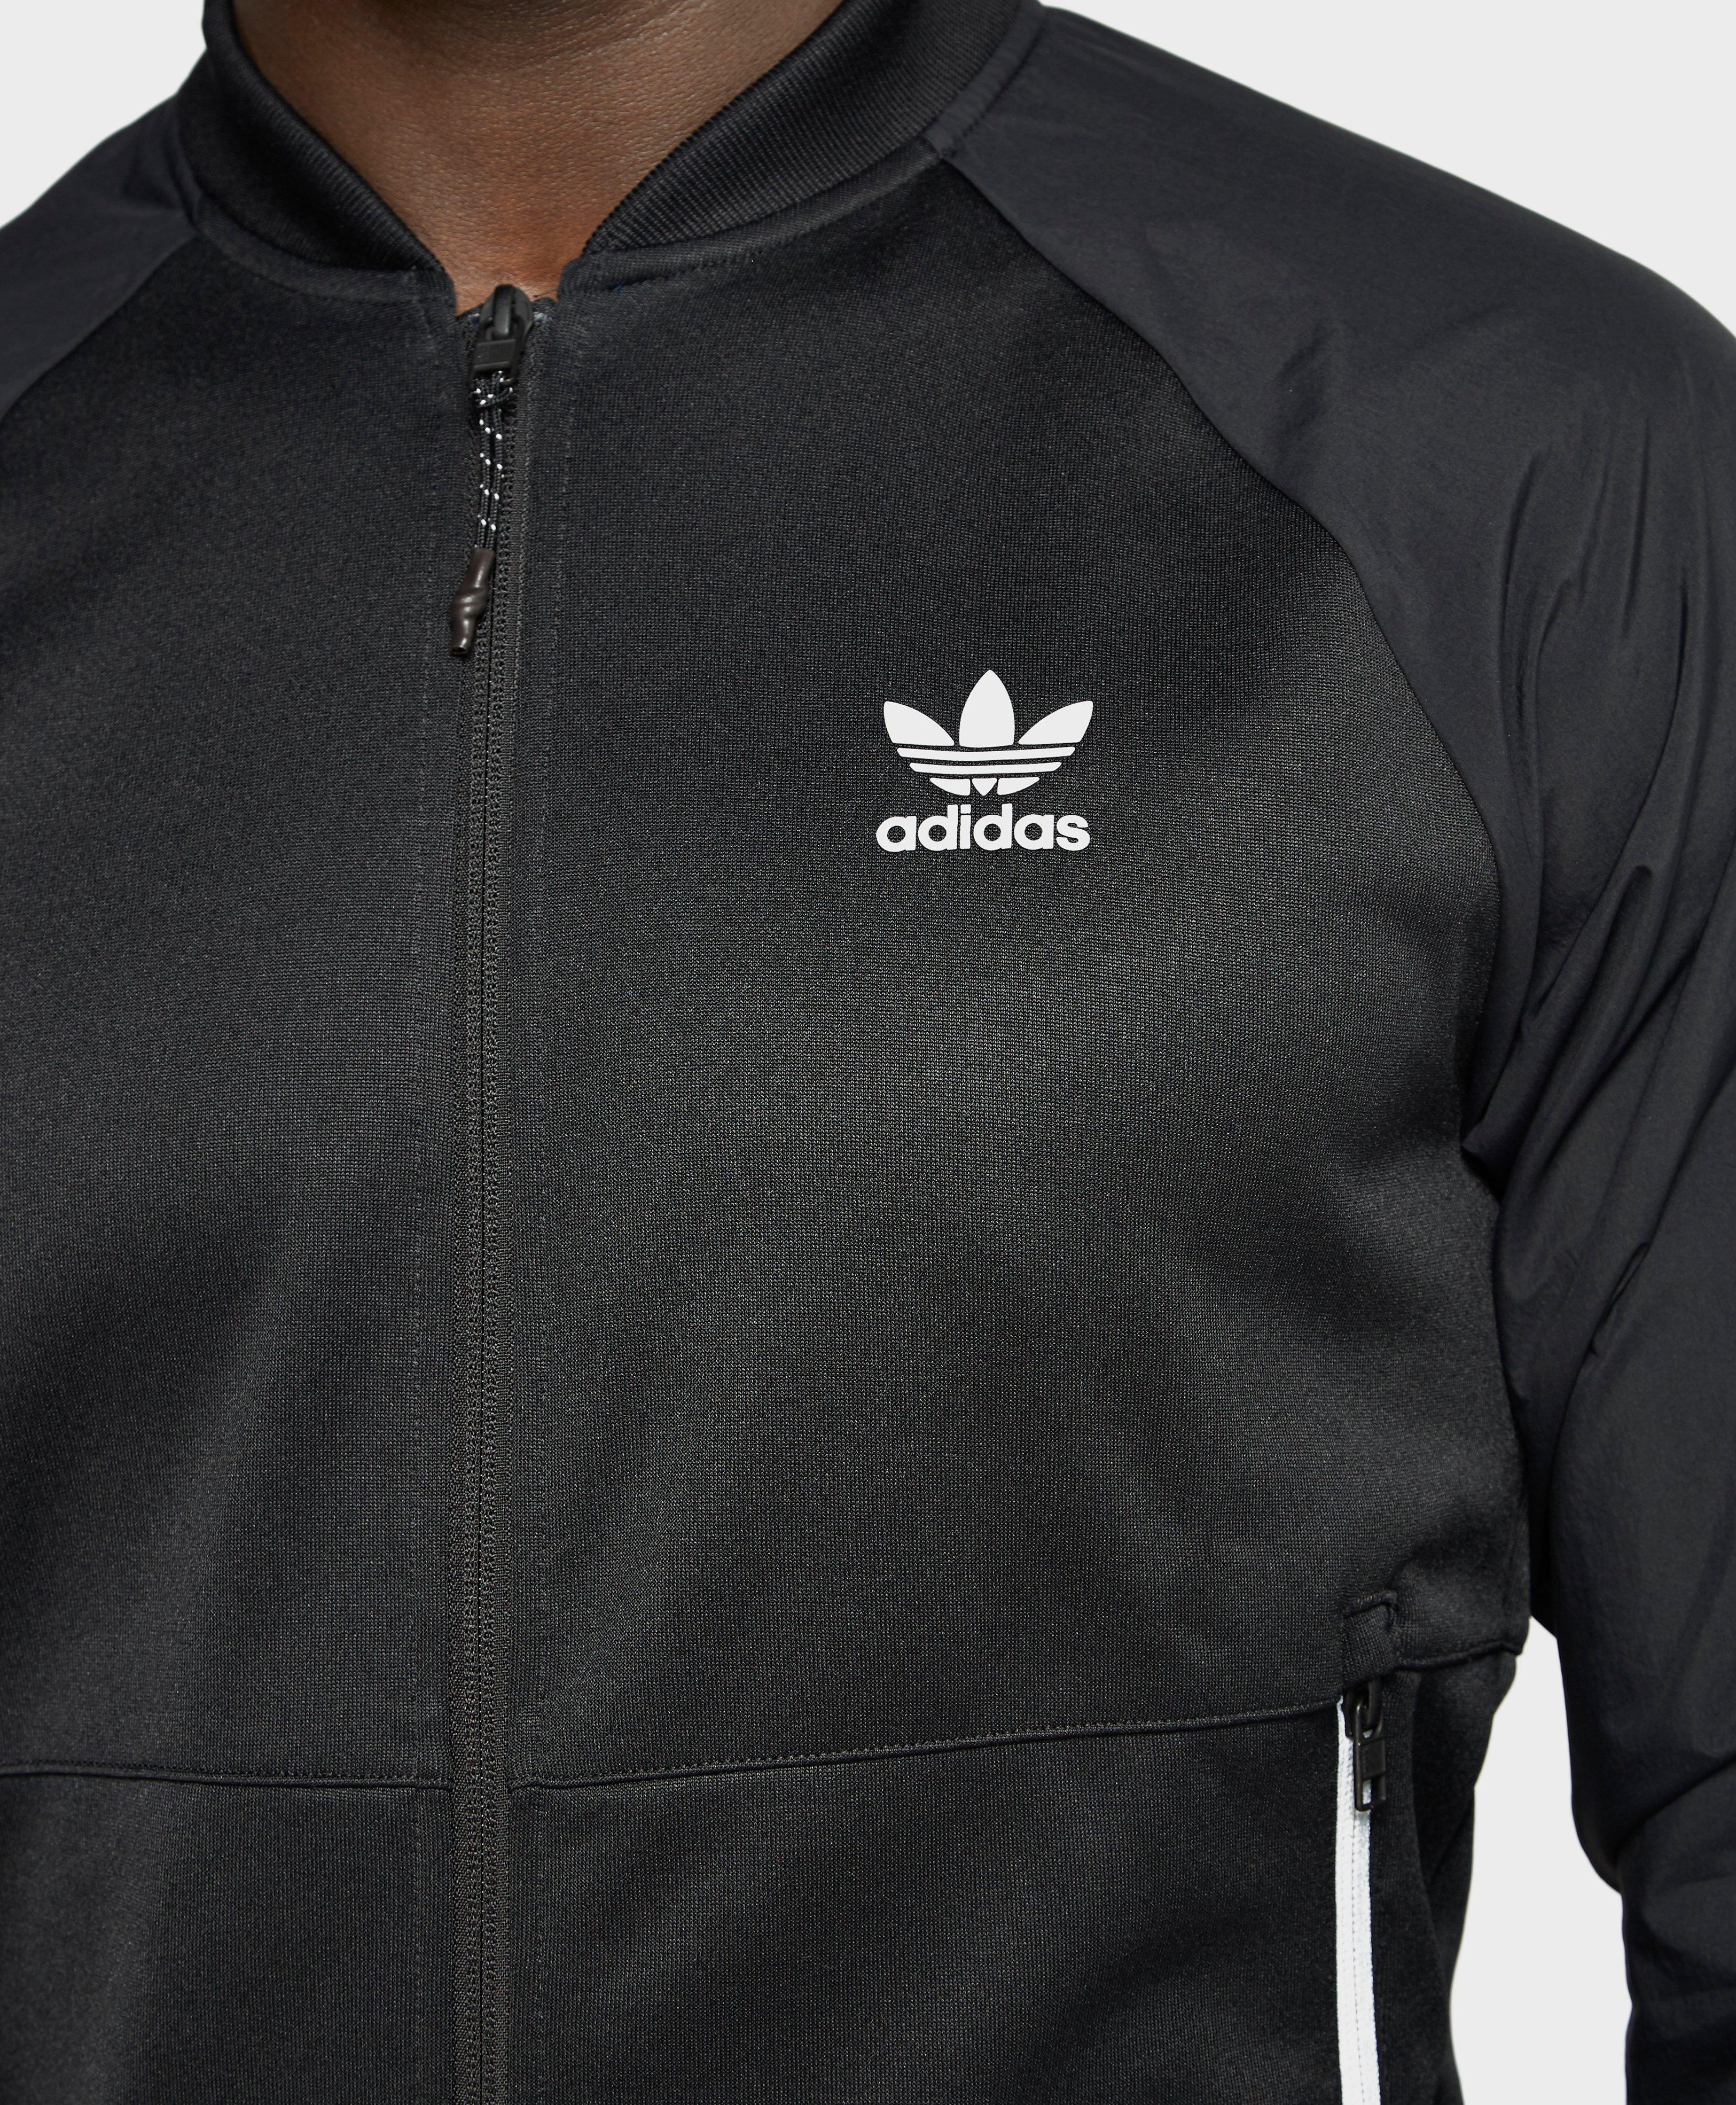 adidas knitted track top